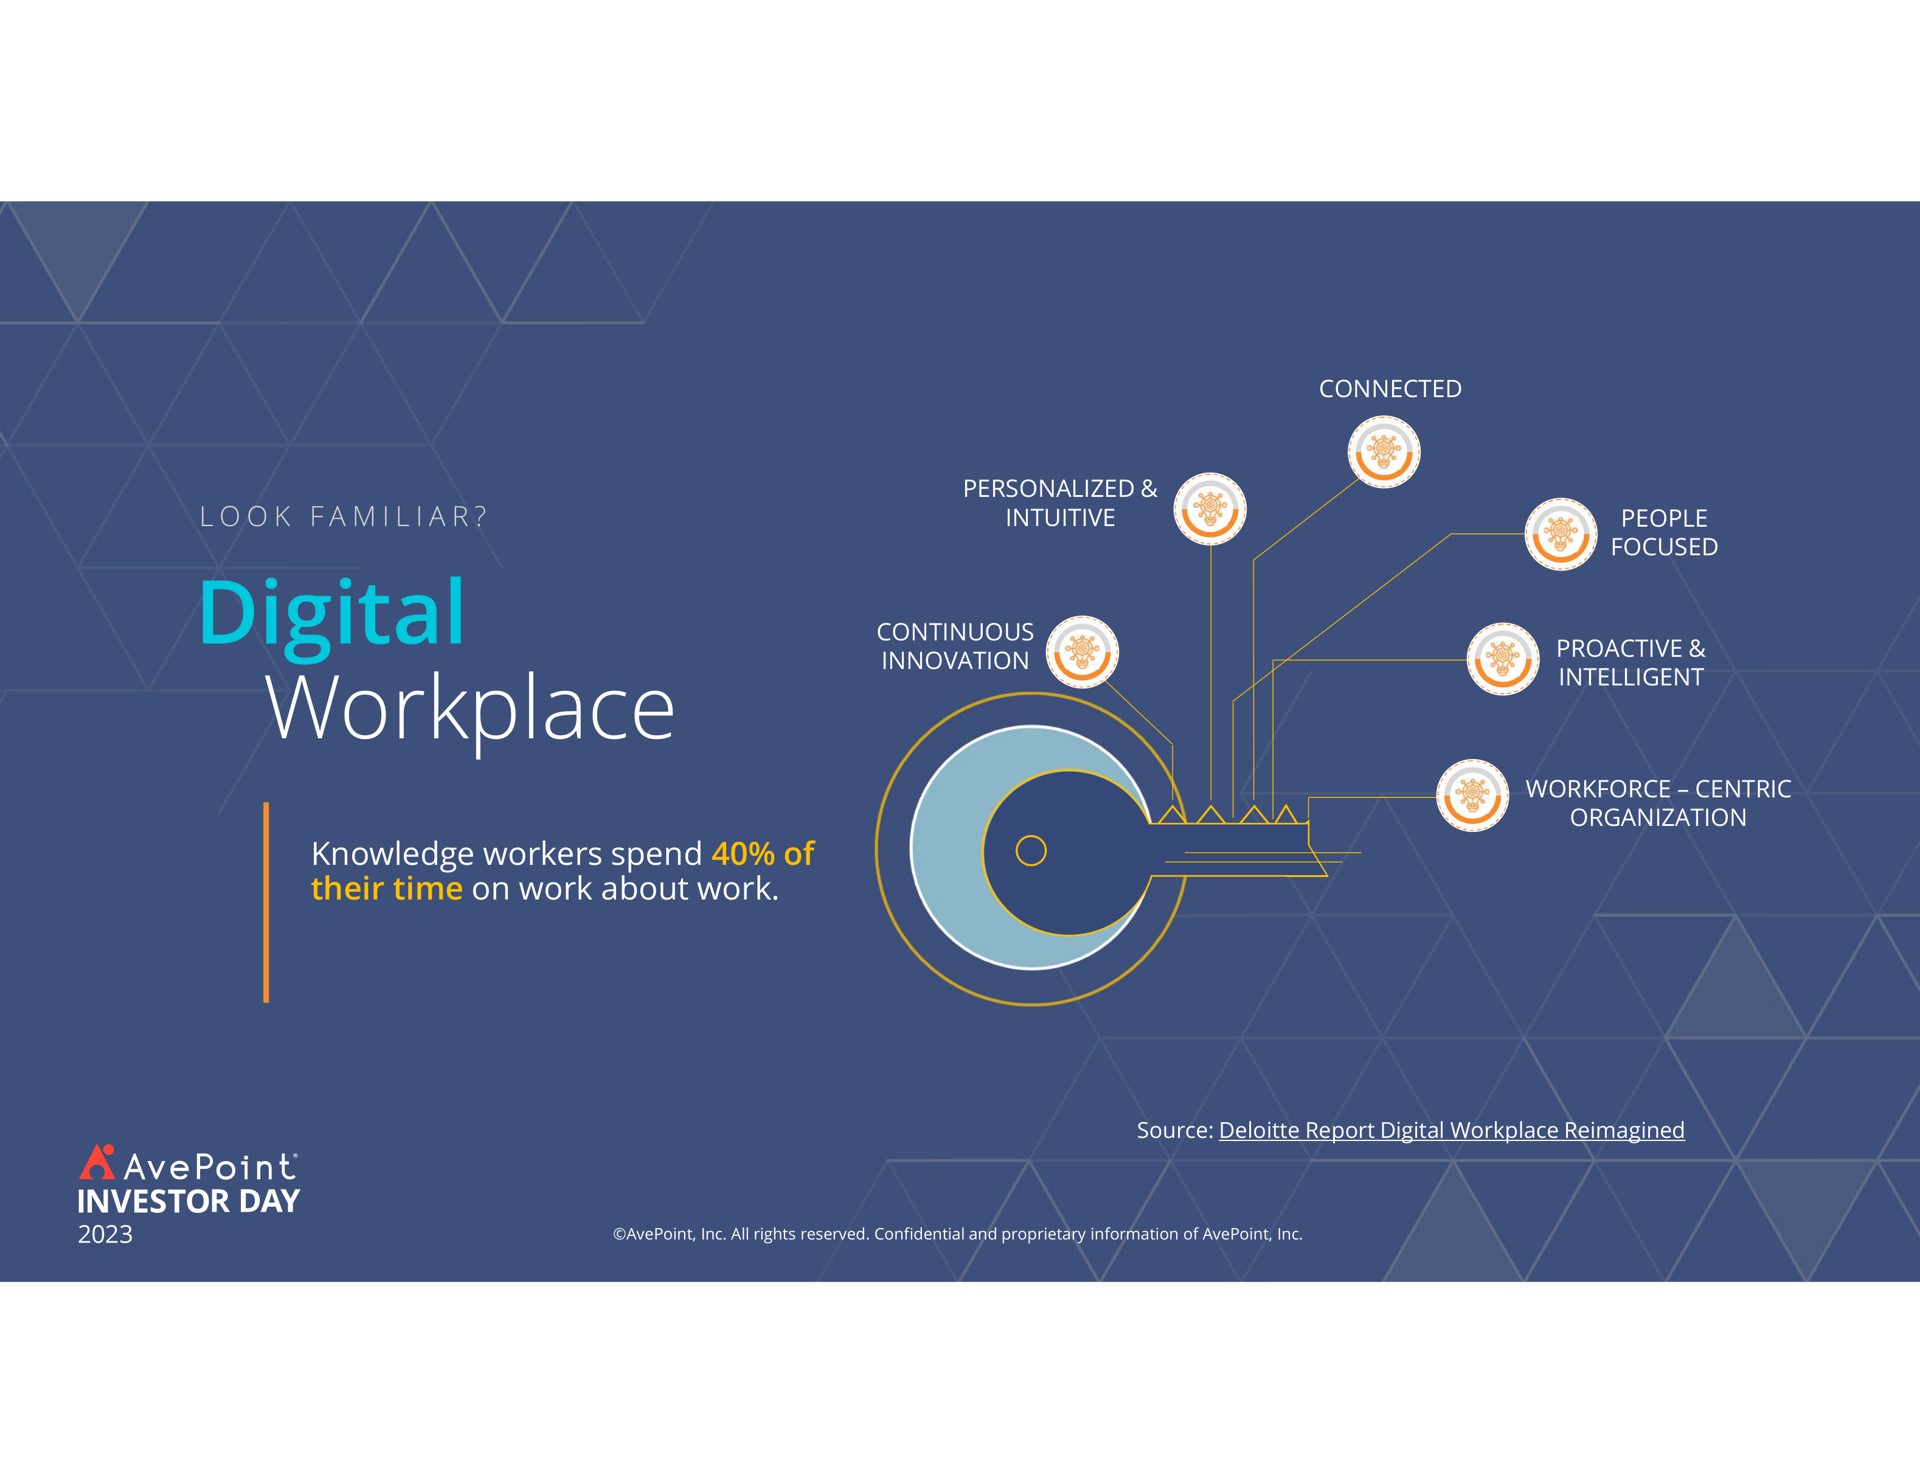 digital workplace knowledge workers spend of their time on work about work | AvePoint